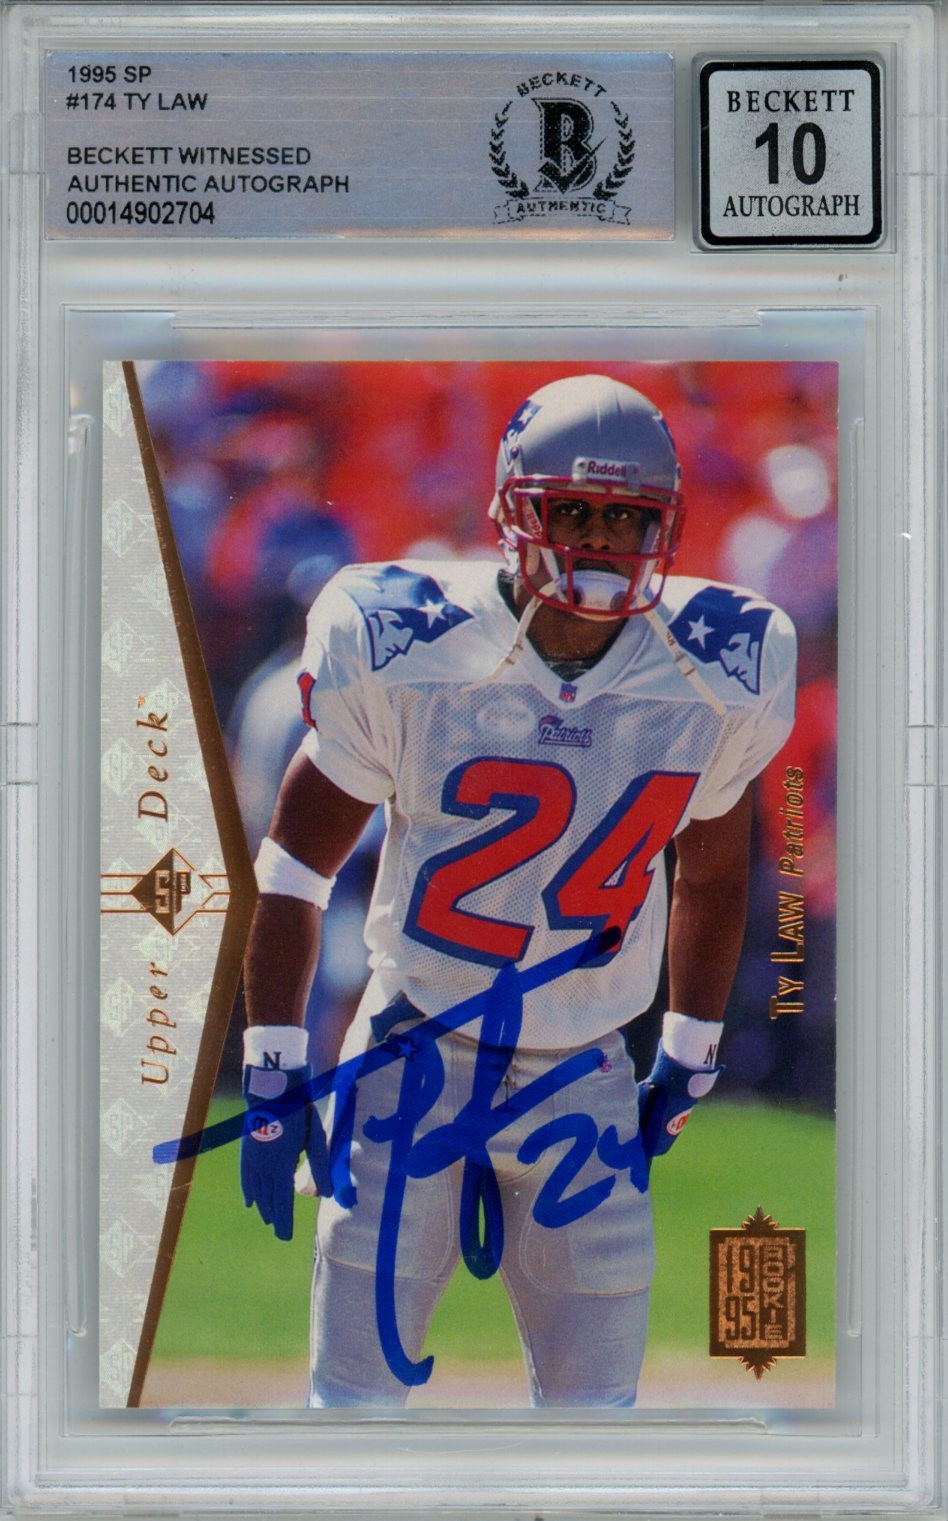 Ty Law Signed New England Patriots 1995 SP #174 Beckett Auto 10